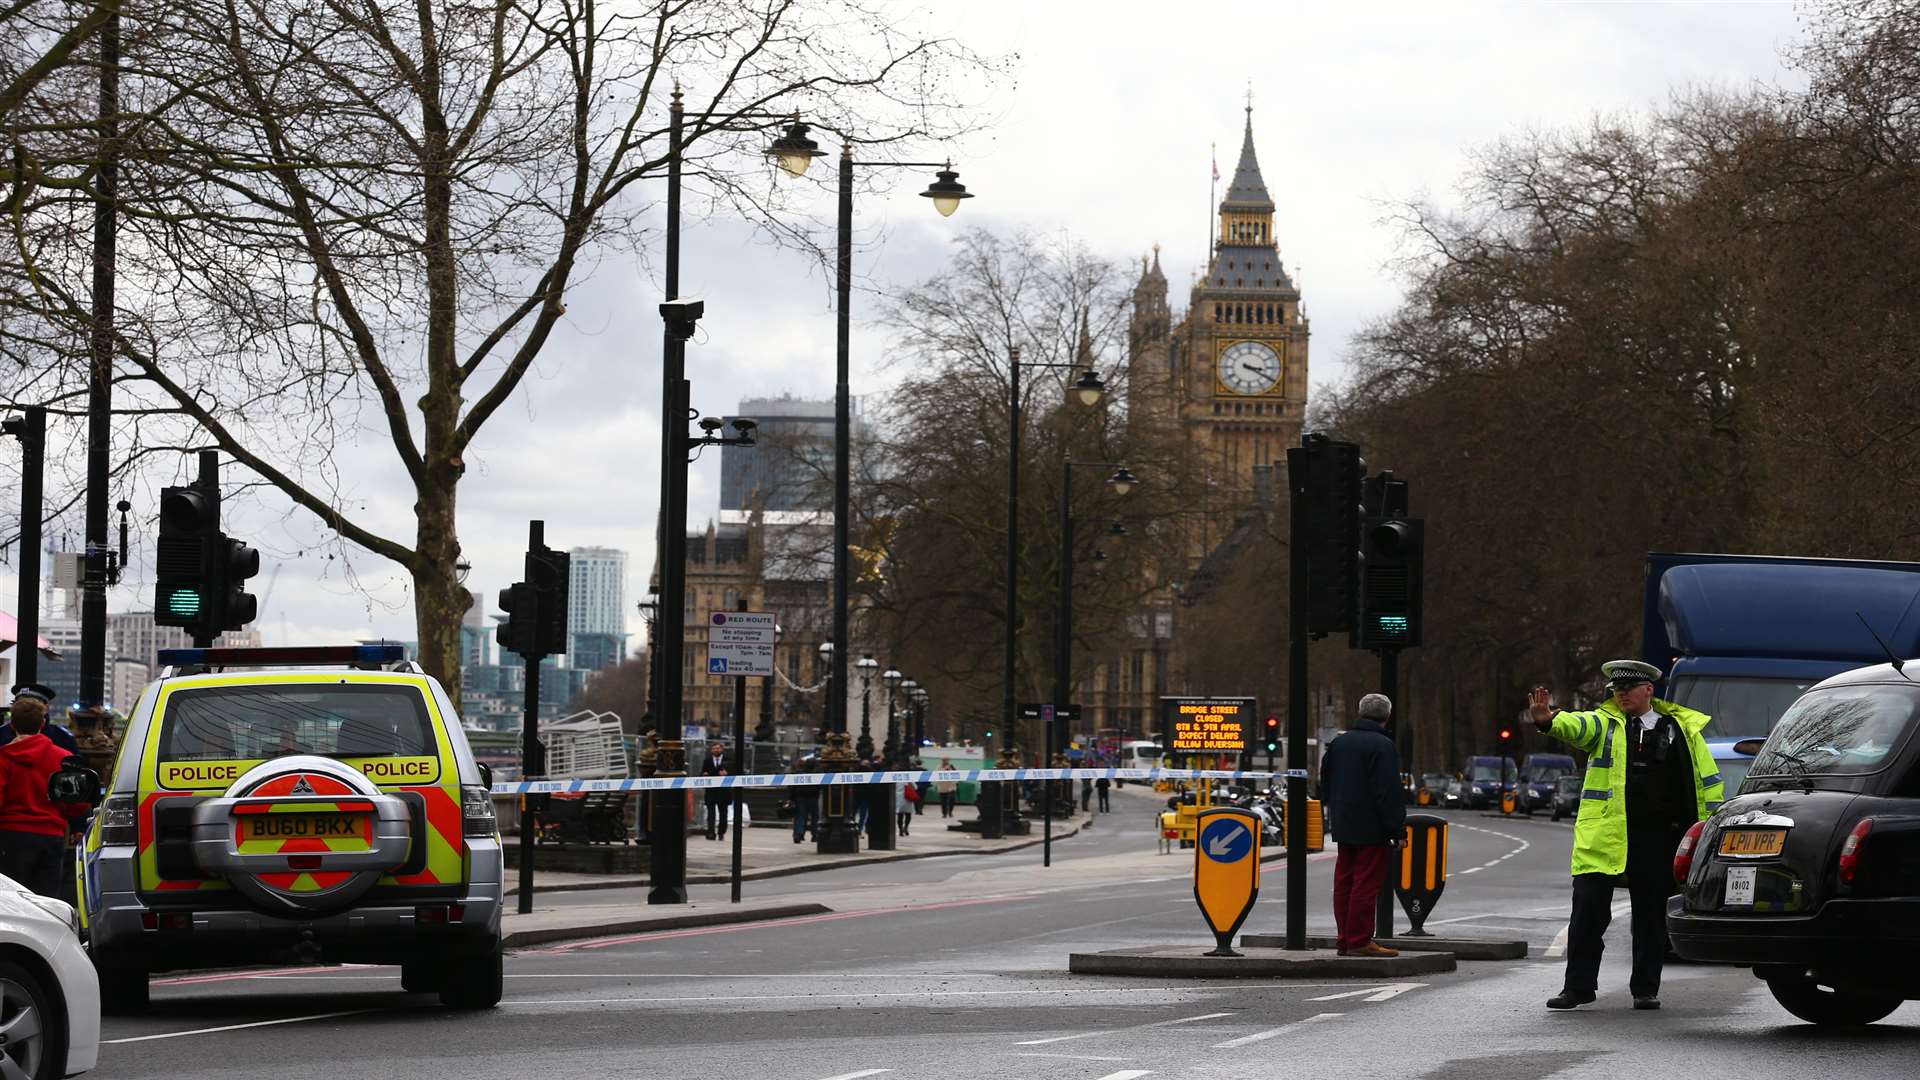 The scene of the Westminster attack. Picture: SWNS.COM